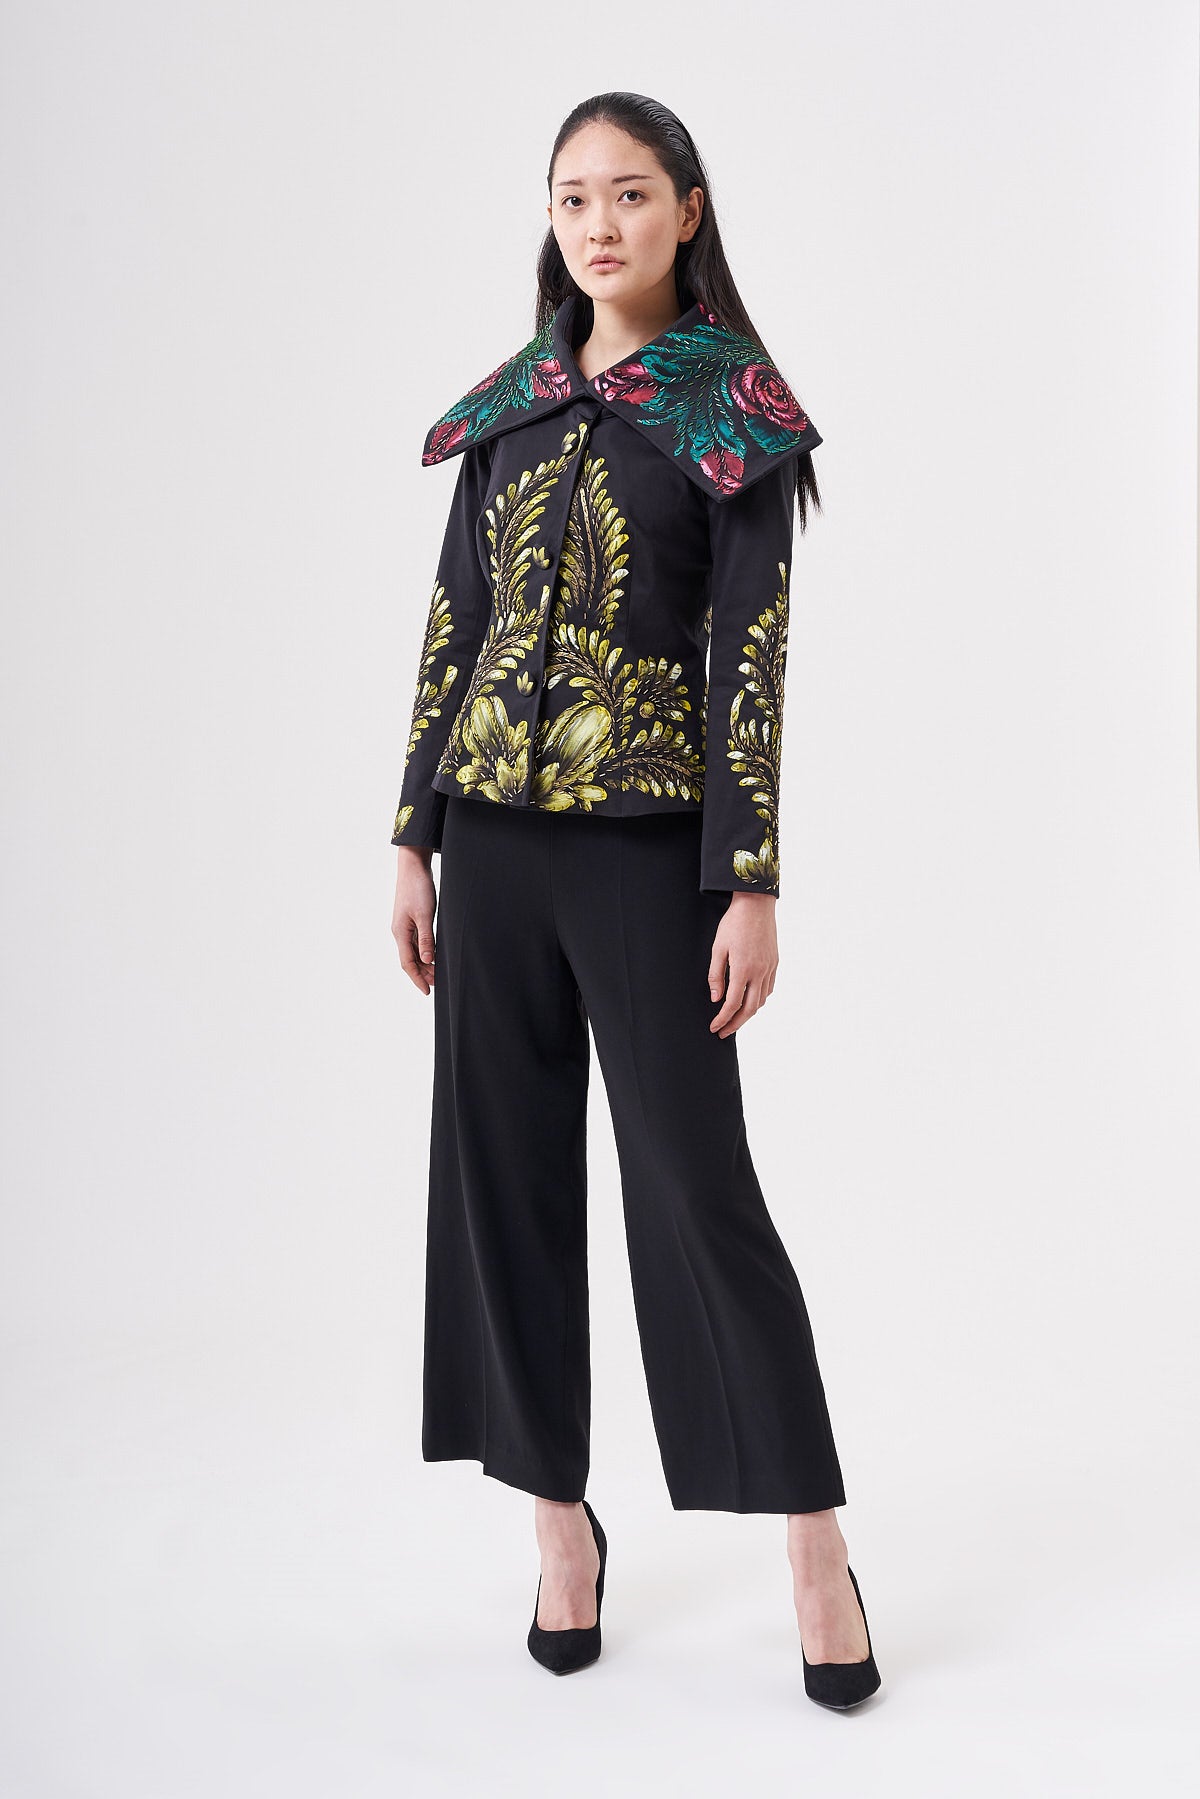 HAND-PAINTED AND HAND-EMBROIDERED JACKET - TALAVERA ORO